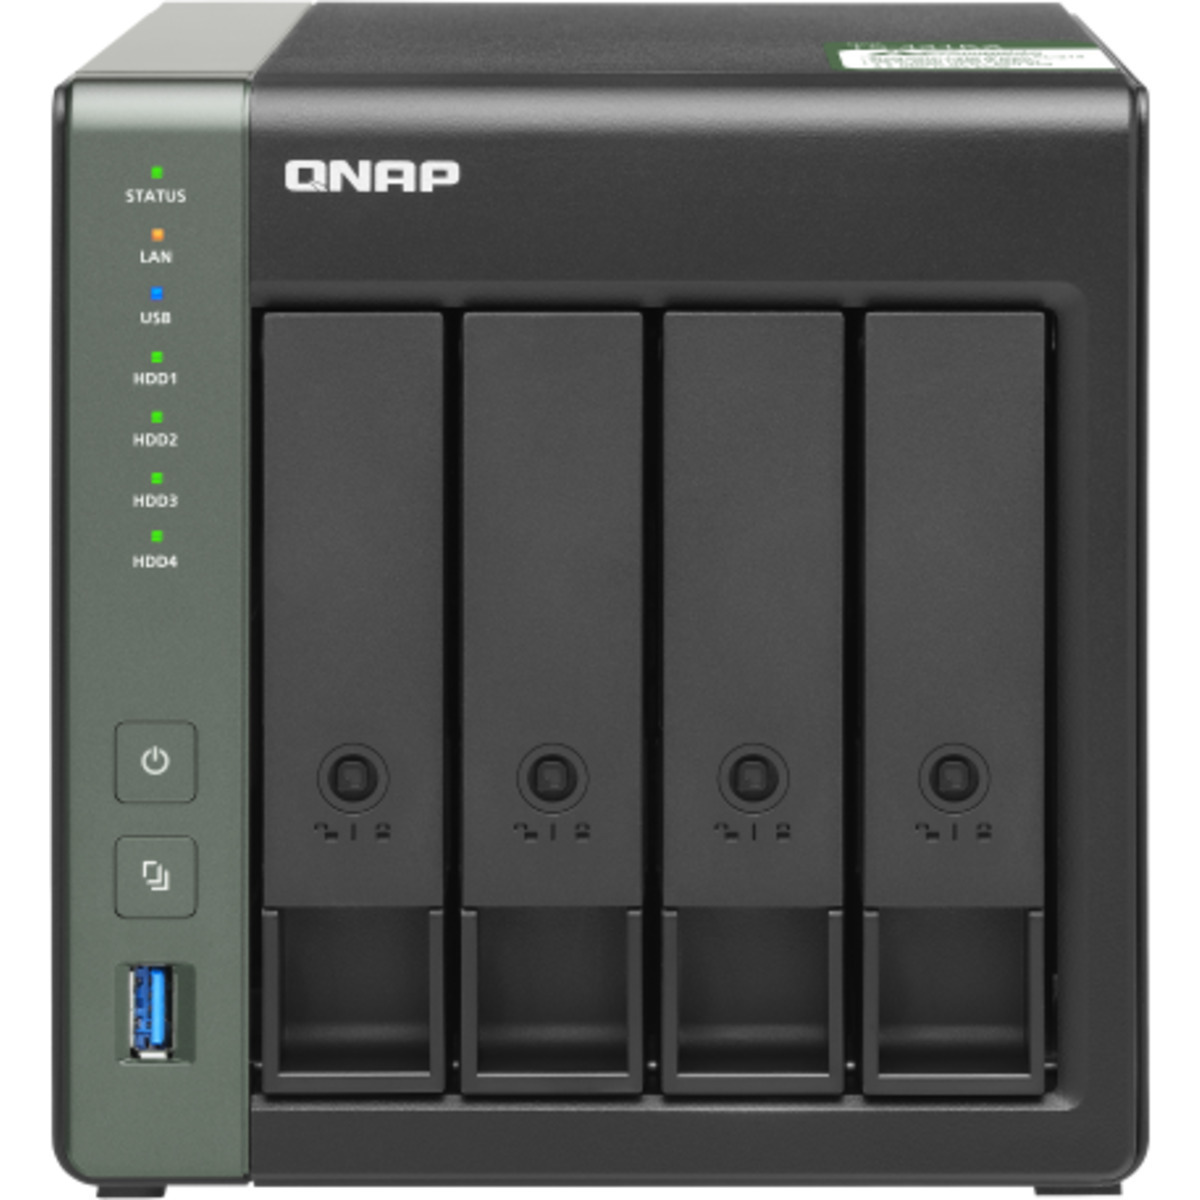 buy $804 QNAP TS-431KX 8tb Desktop NAS - Network Attached Storage Device 4x2000gb Seagate BarraCuda ST2000DM008 3.5 7200rpm SATA 6Gb/s HDD CONSUMER Class Drives Installed - Burn-In Tested - ON SALE - FREE RAM UPGRADE - nas headquarters buy network attached storage server device das new raid-5 free shipping usa christmas new year holiday sale TS-431KX